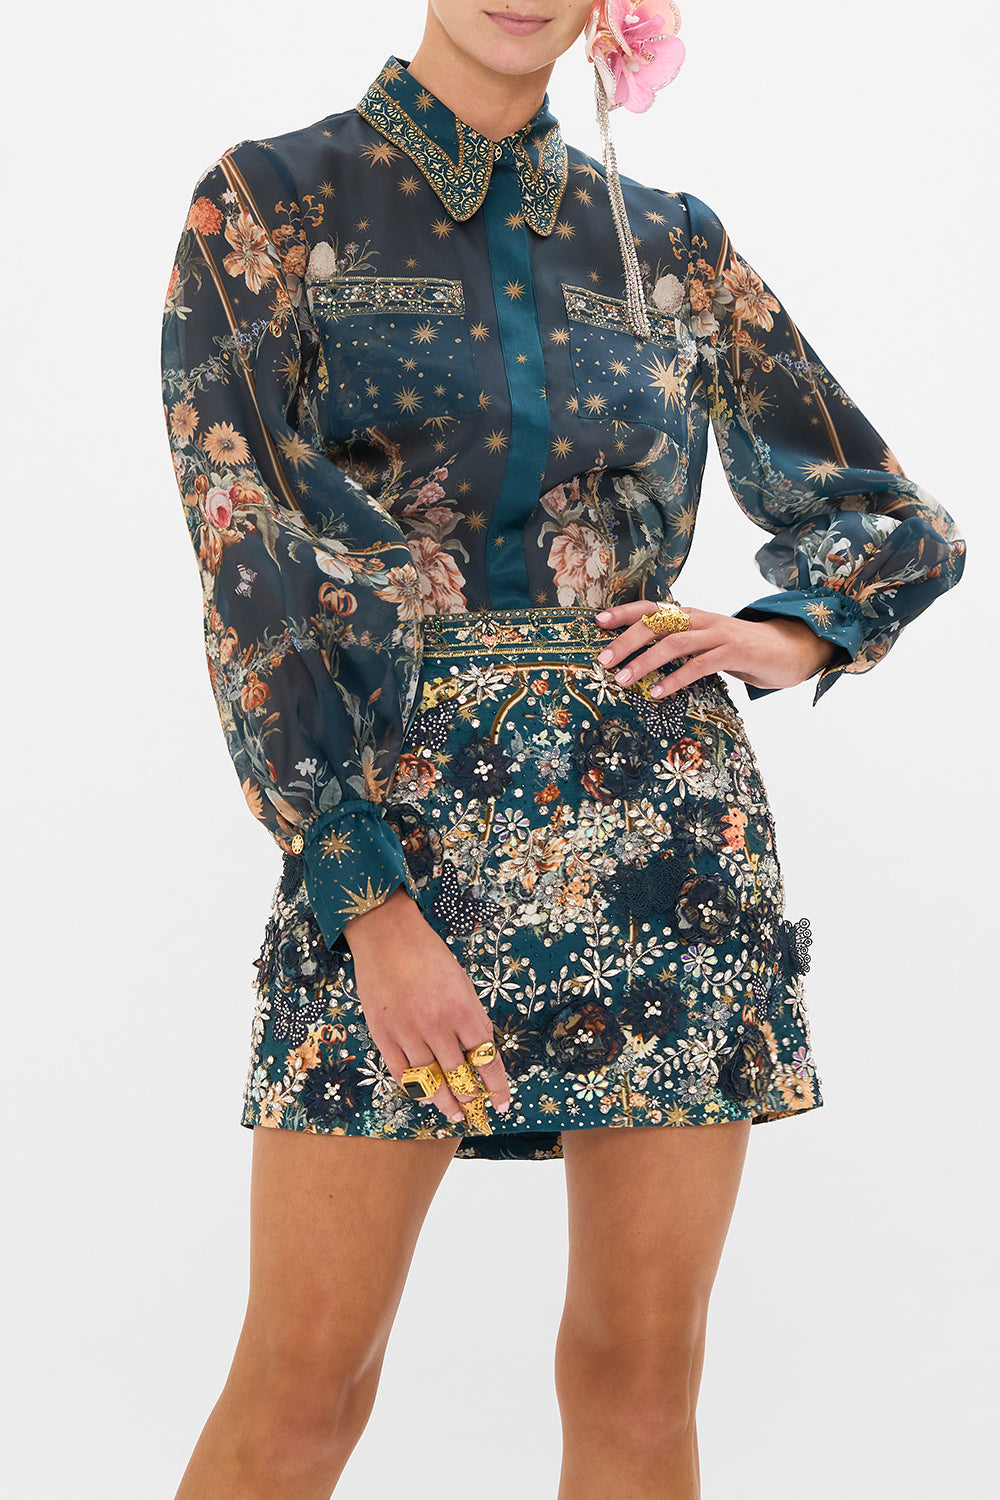 CAMILLA silk blouse in She Who Wears The Crown print